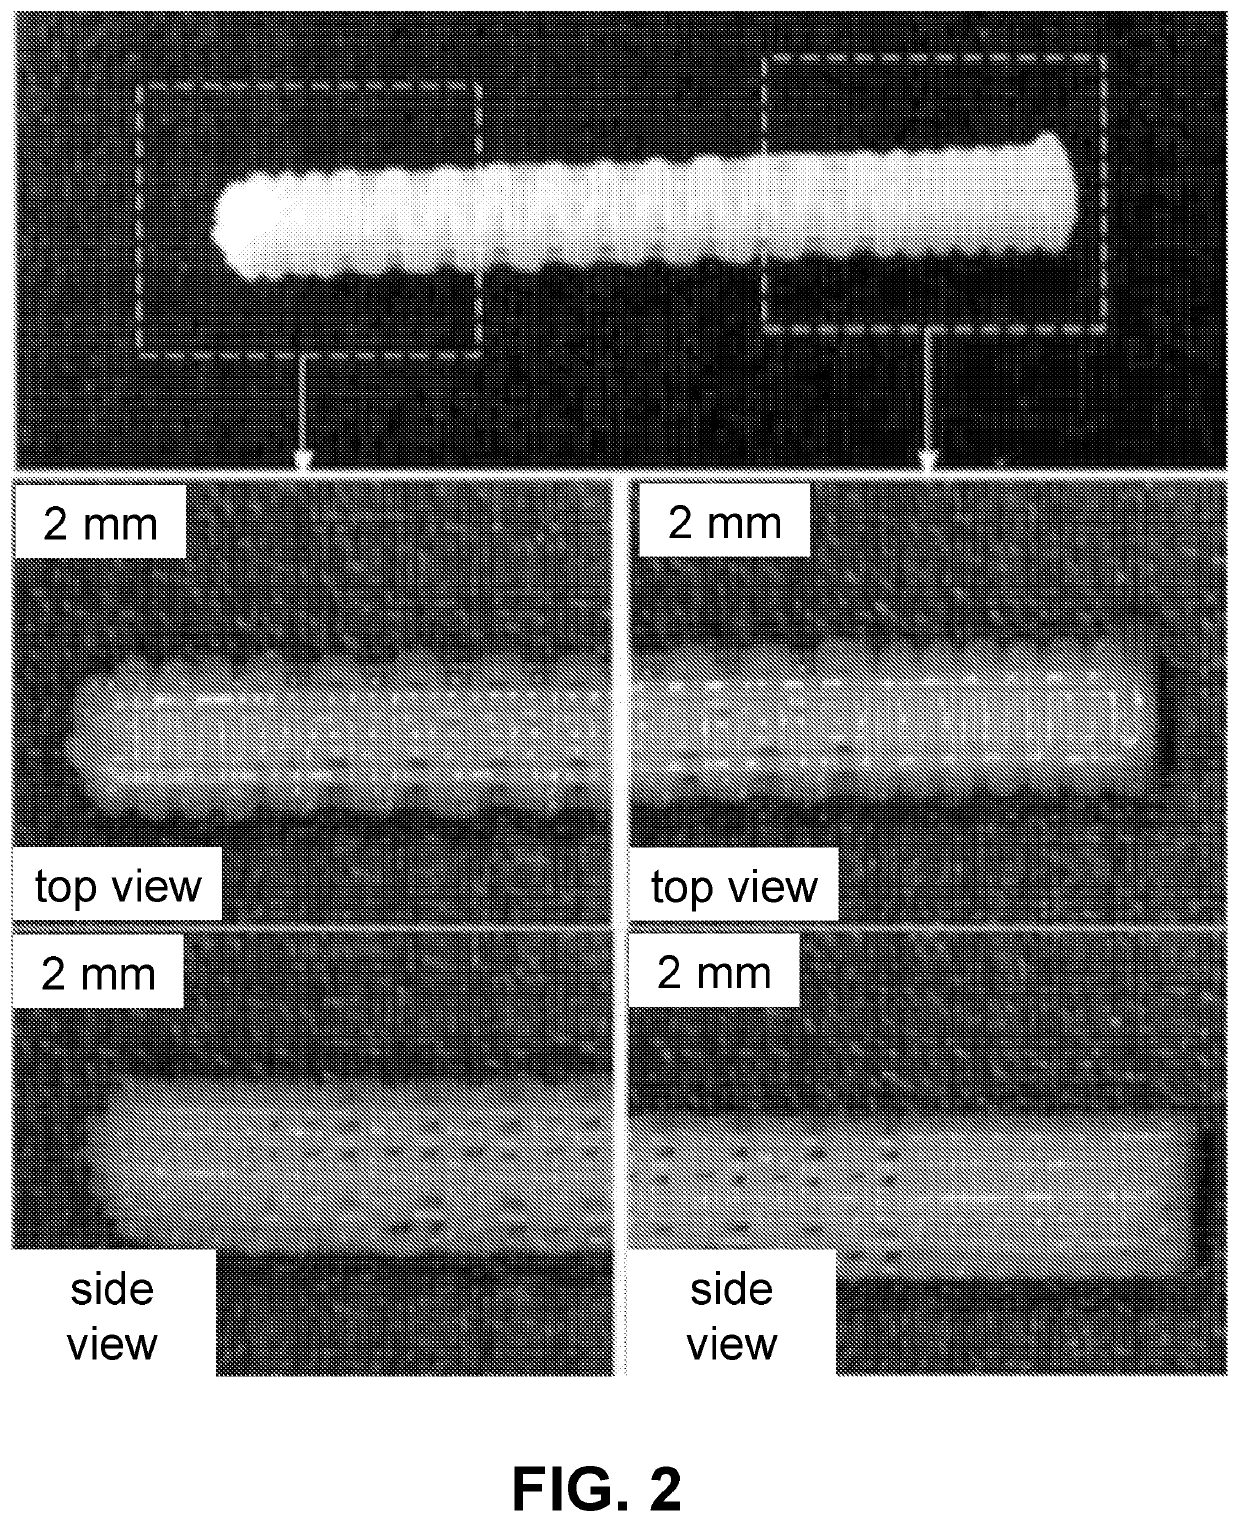 Customized load-bearing and bioactive functionally-graded implant for treatment of osteonecrosis